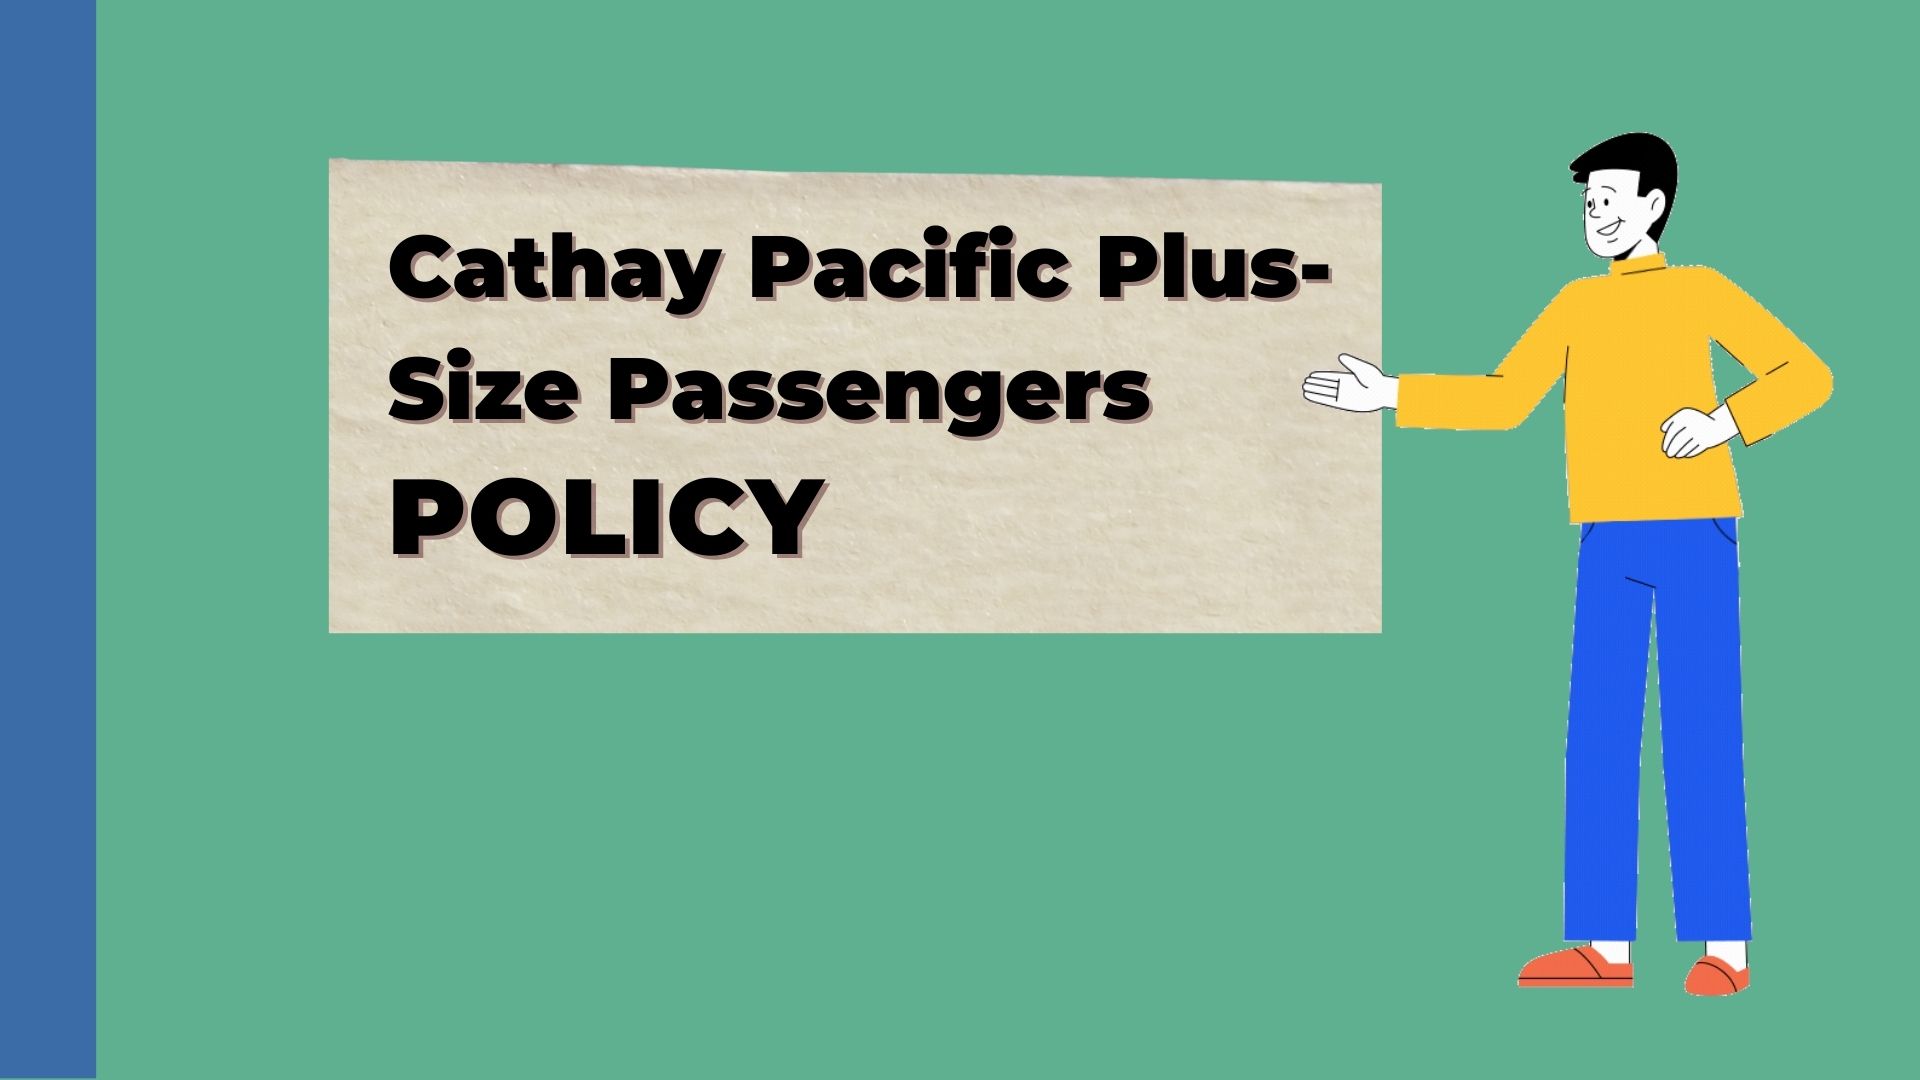 Cathay Pacific Plus-Size Passengers Policy64100e28d90aa.jpg